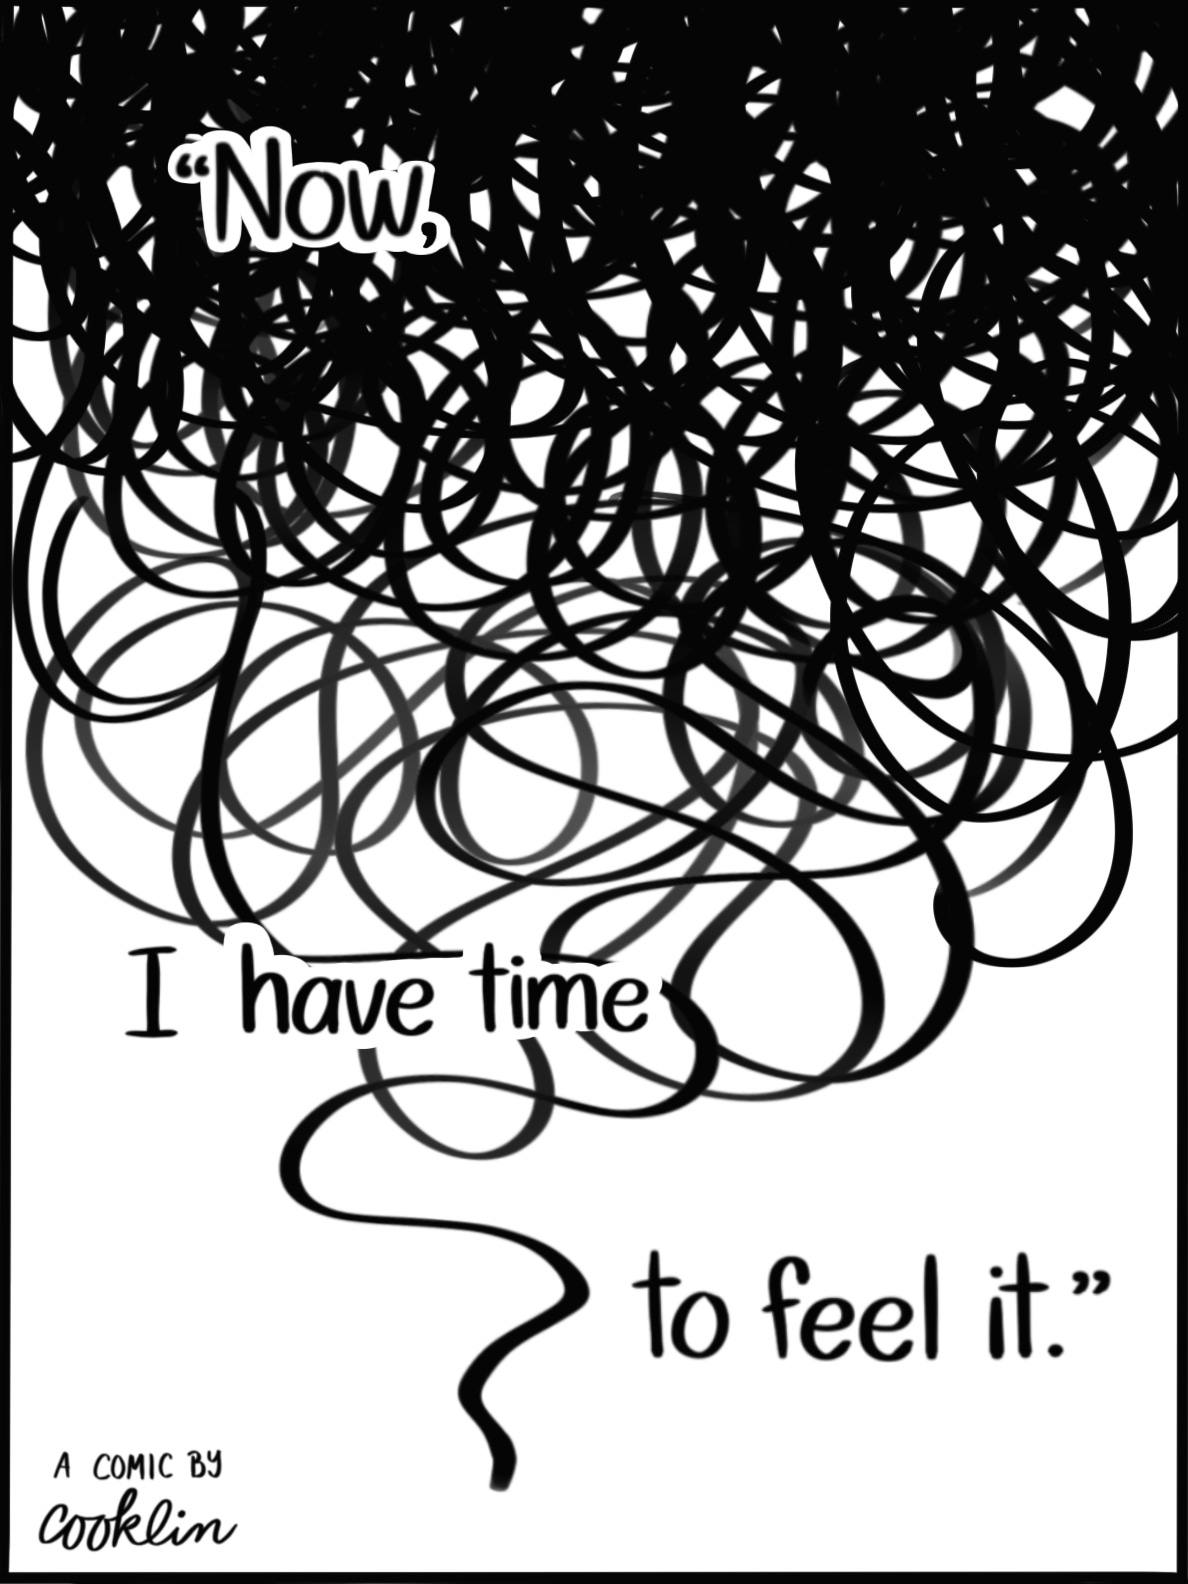 Caption: "Now, I have time to feel it." Image: The scribbles unravel as you scroll down until it becomes a single thread. A comic by cooklin.